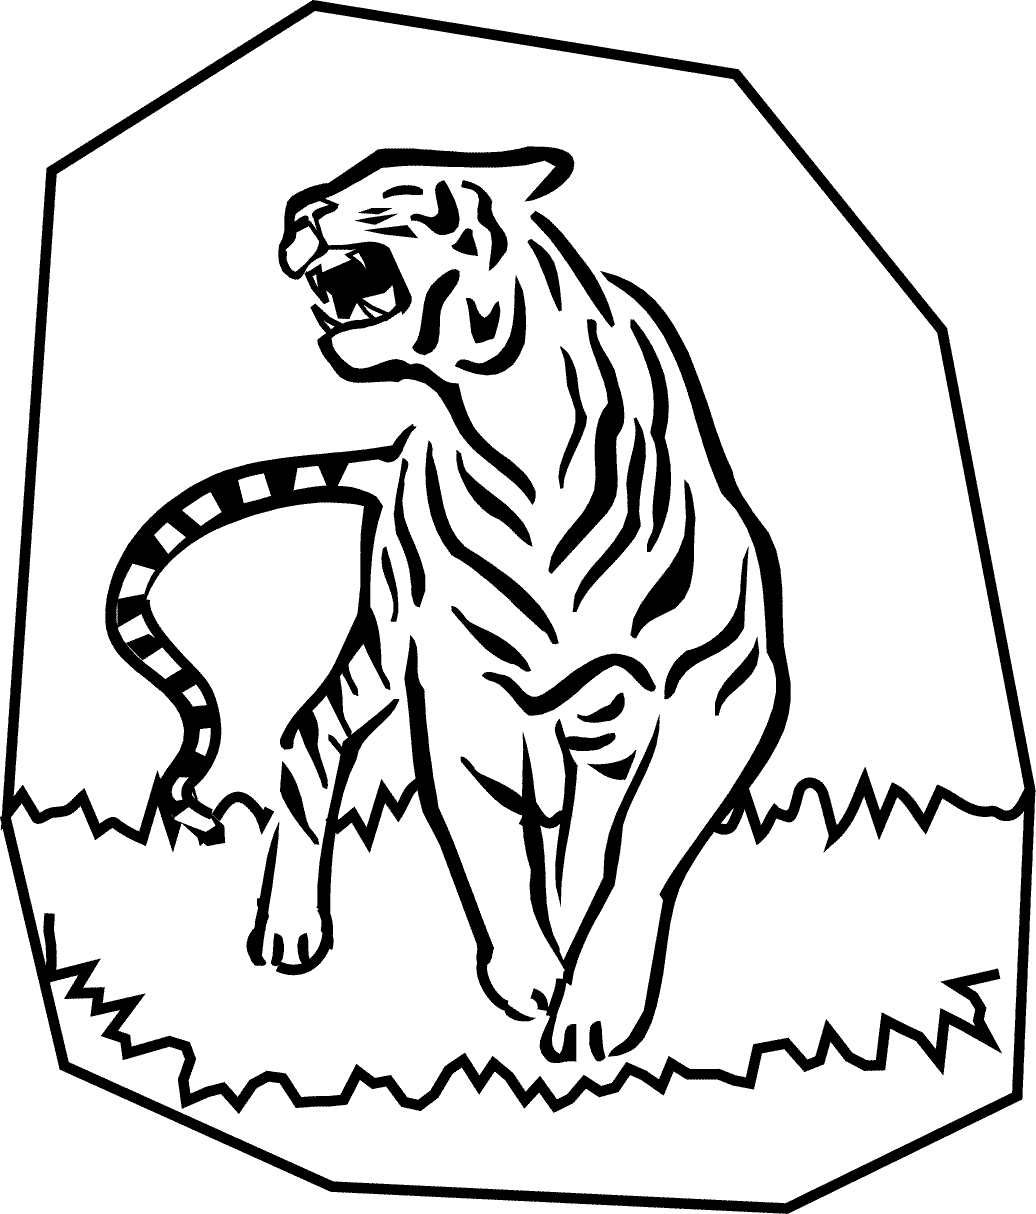 Free Printable Tiger Coloring Pages For Kids Effy Moom Free Coloring Picture wallpaper give a chance to color on the wall without getting in trouble! Fill the walls of your home or office with stress-relieving [effymoom.blogspot.com]